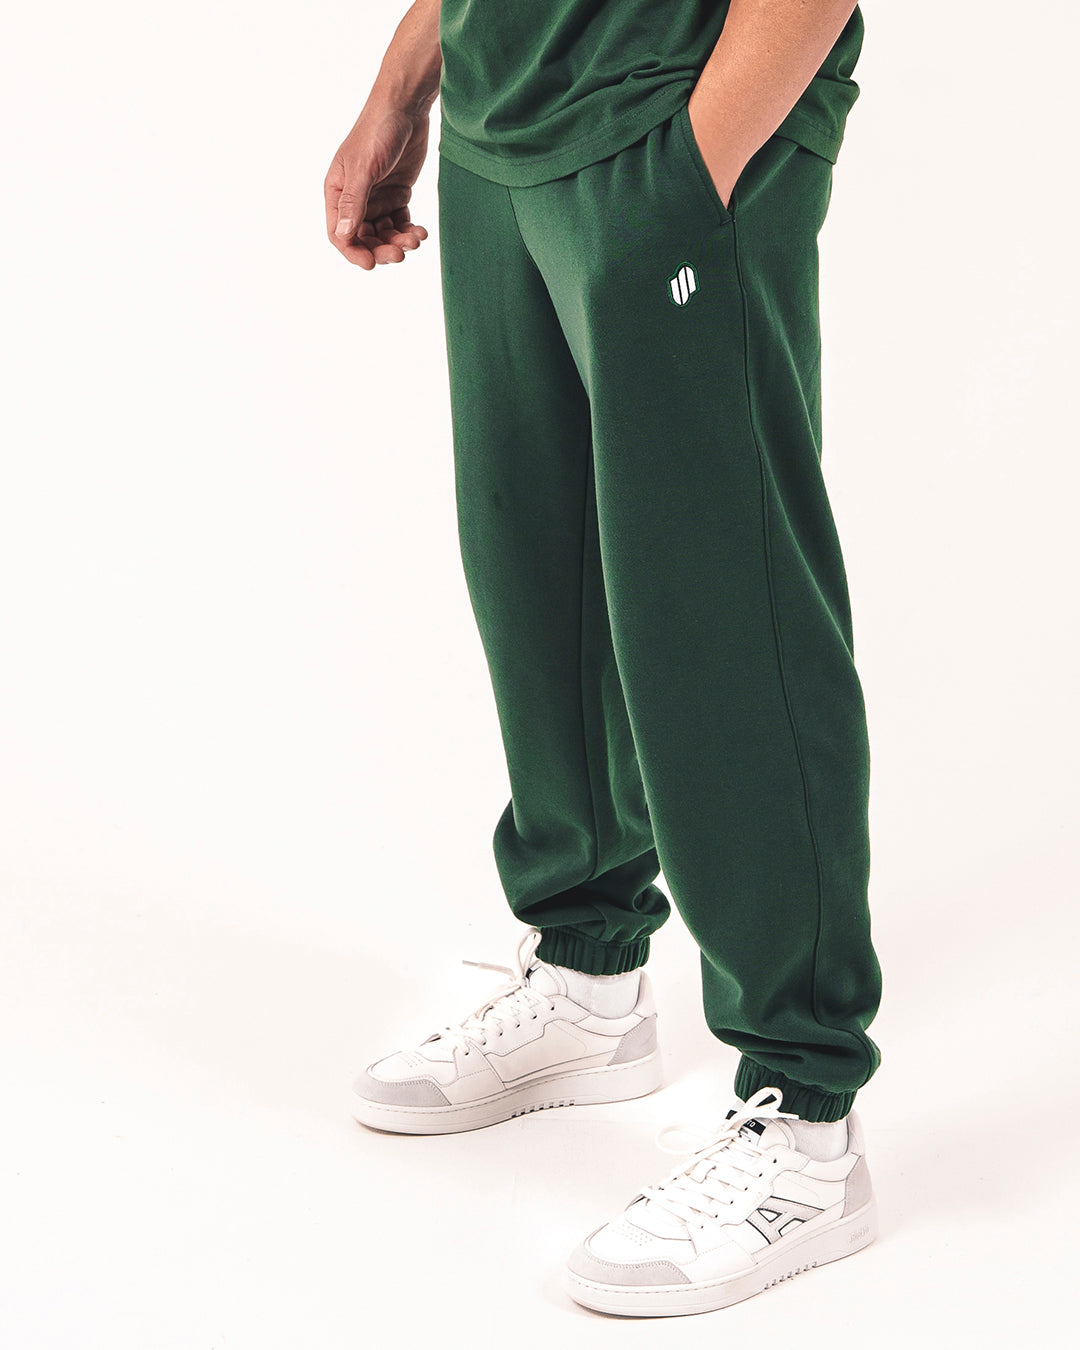 PFC: 002-4 - Mens Sweatpants - Forest Green